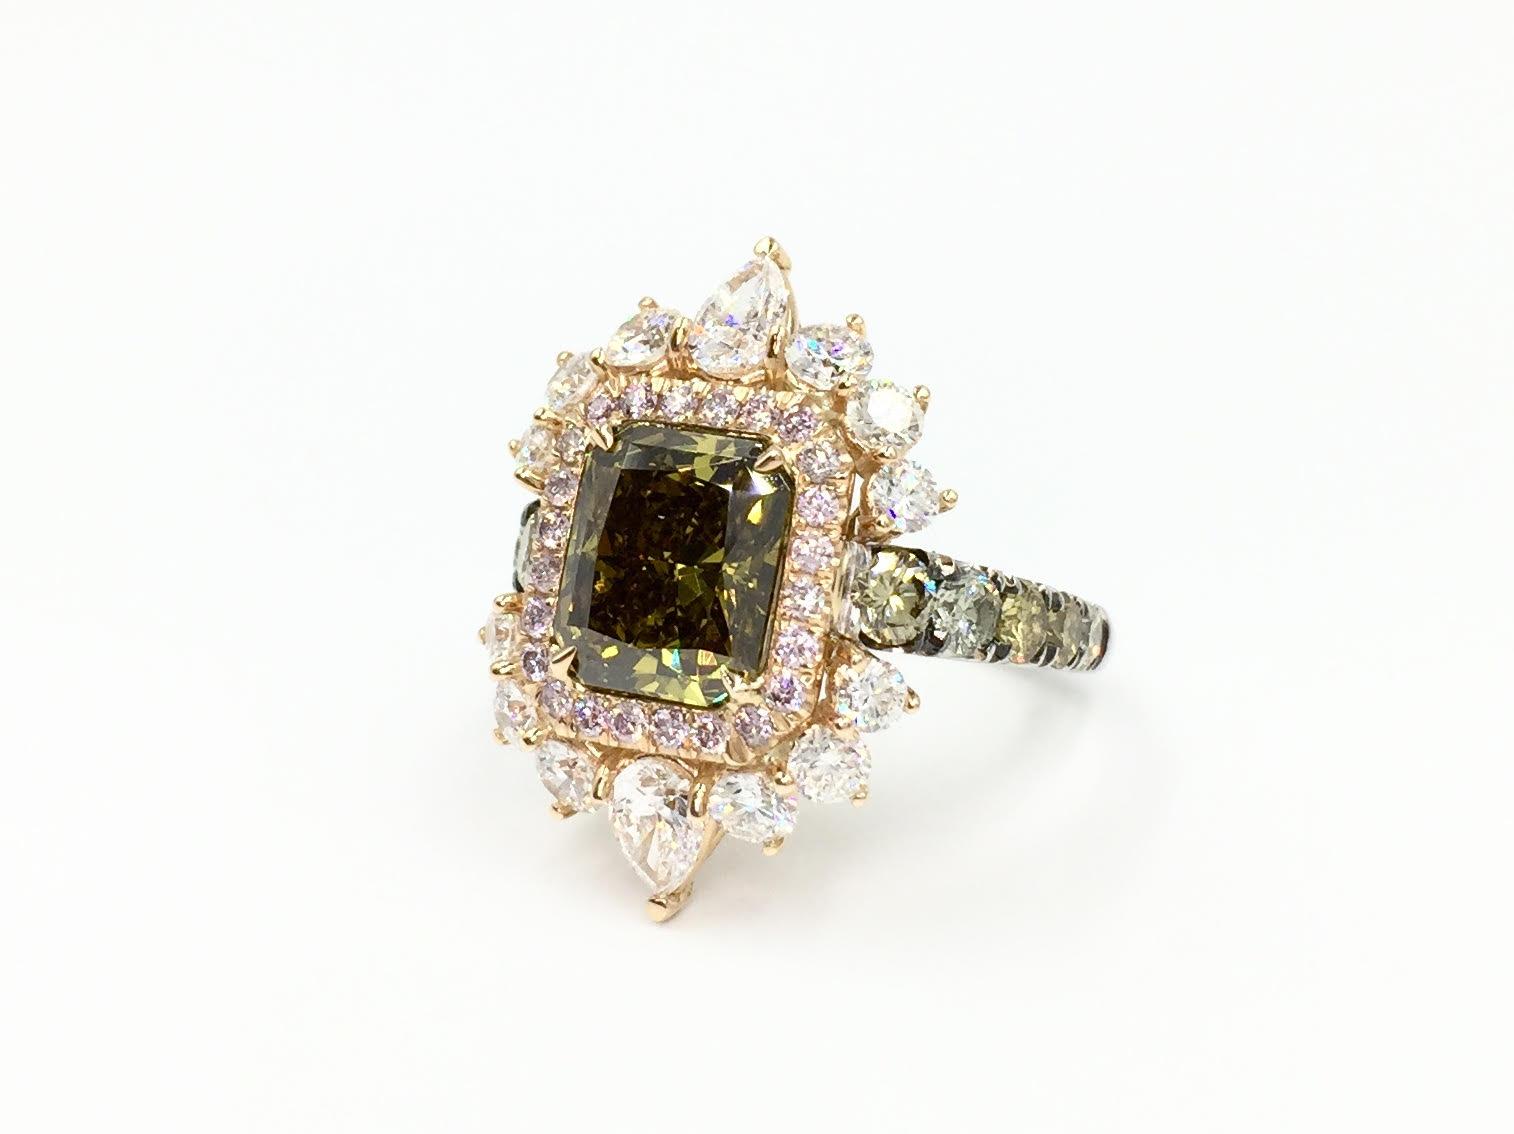 High Victorian GIA Certified 3.02 Carat Fancy Brown-Greenish Yellow Diamond Cocktail Ring